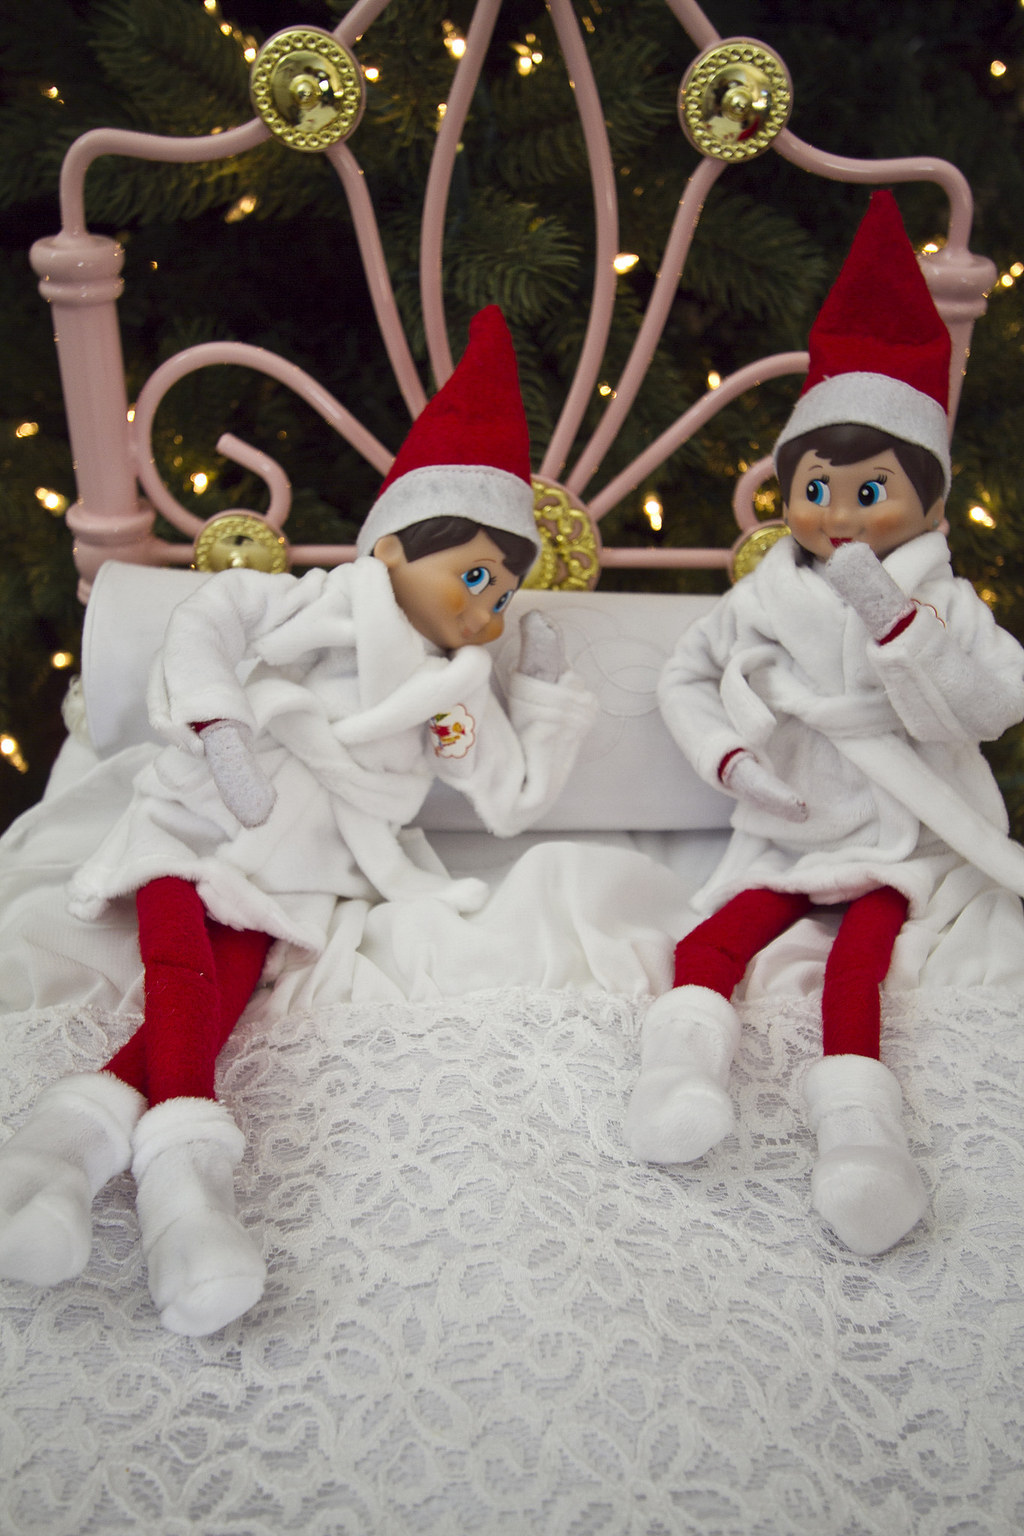 Two elves lying on a bed and wearing robes